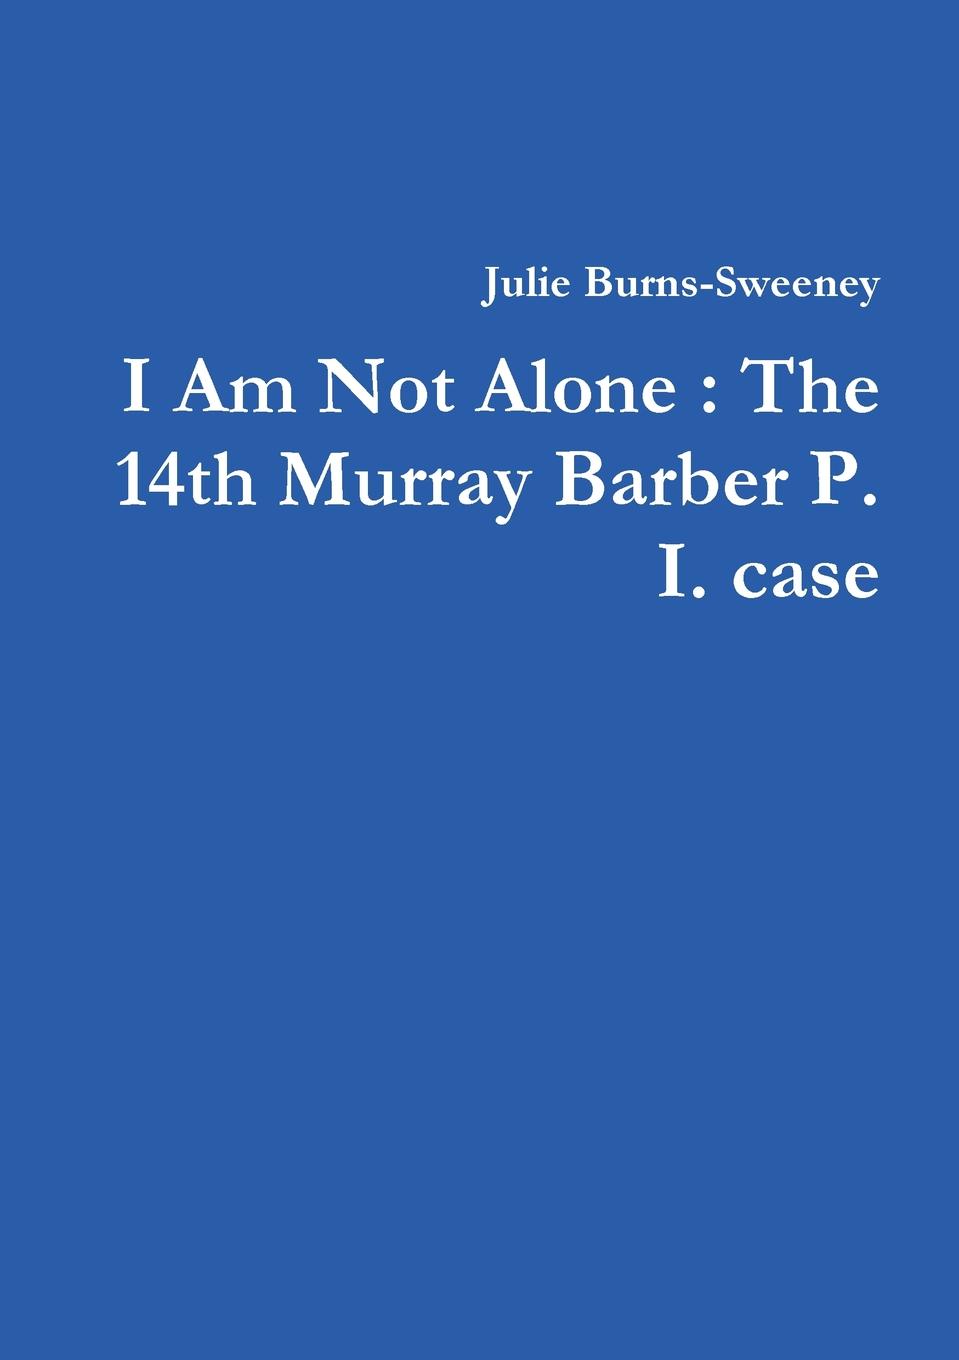 Julie Burns-Sweeney I Am Not Alone. The 14th Murray Barber P. I. case